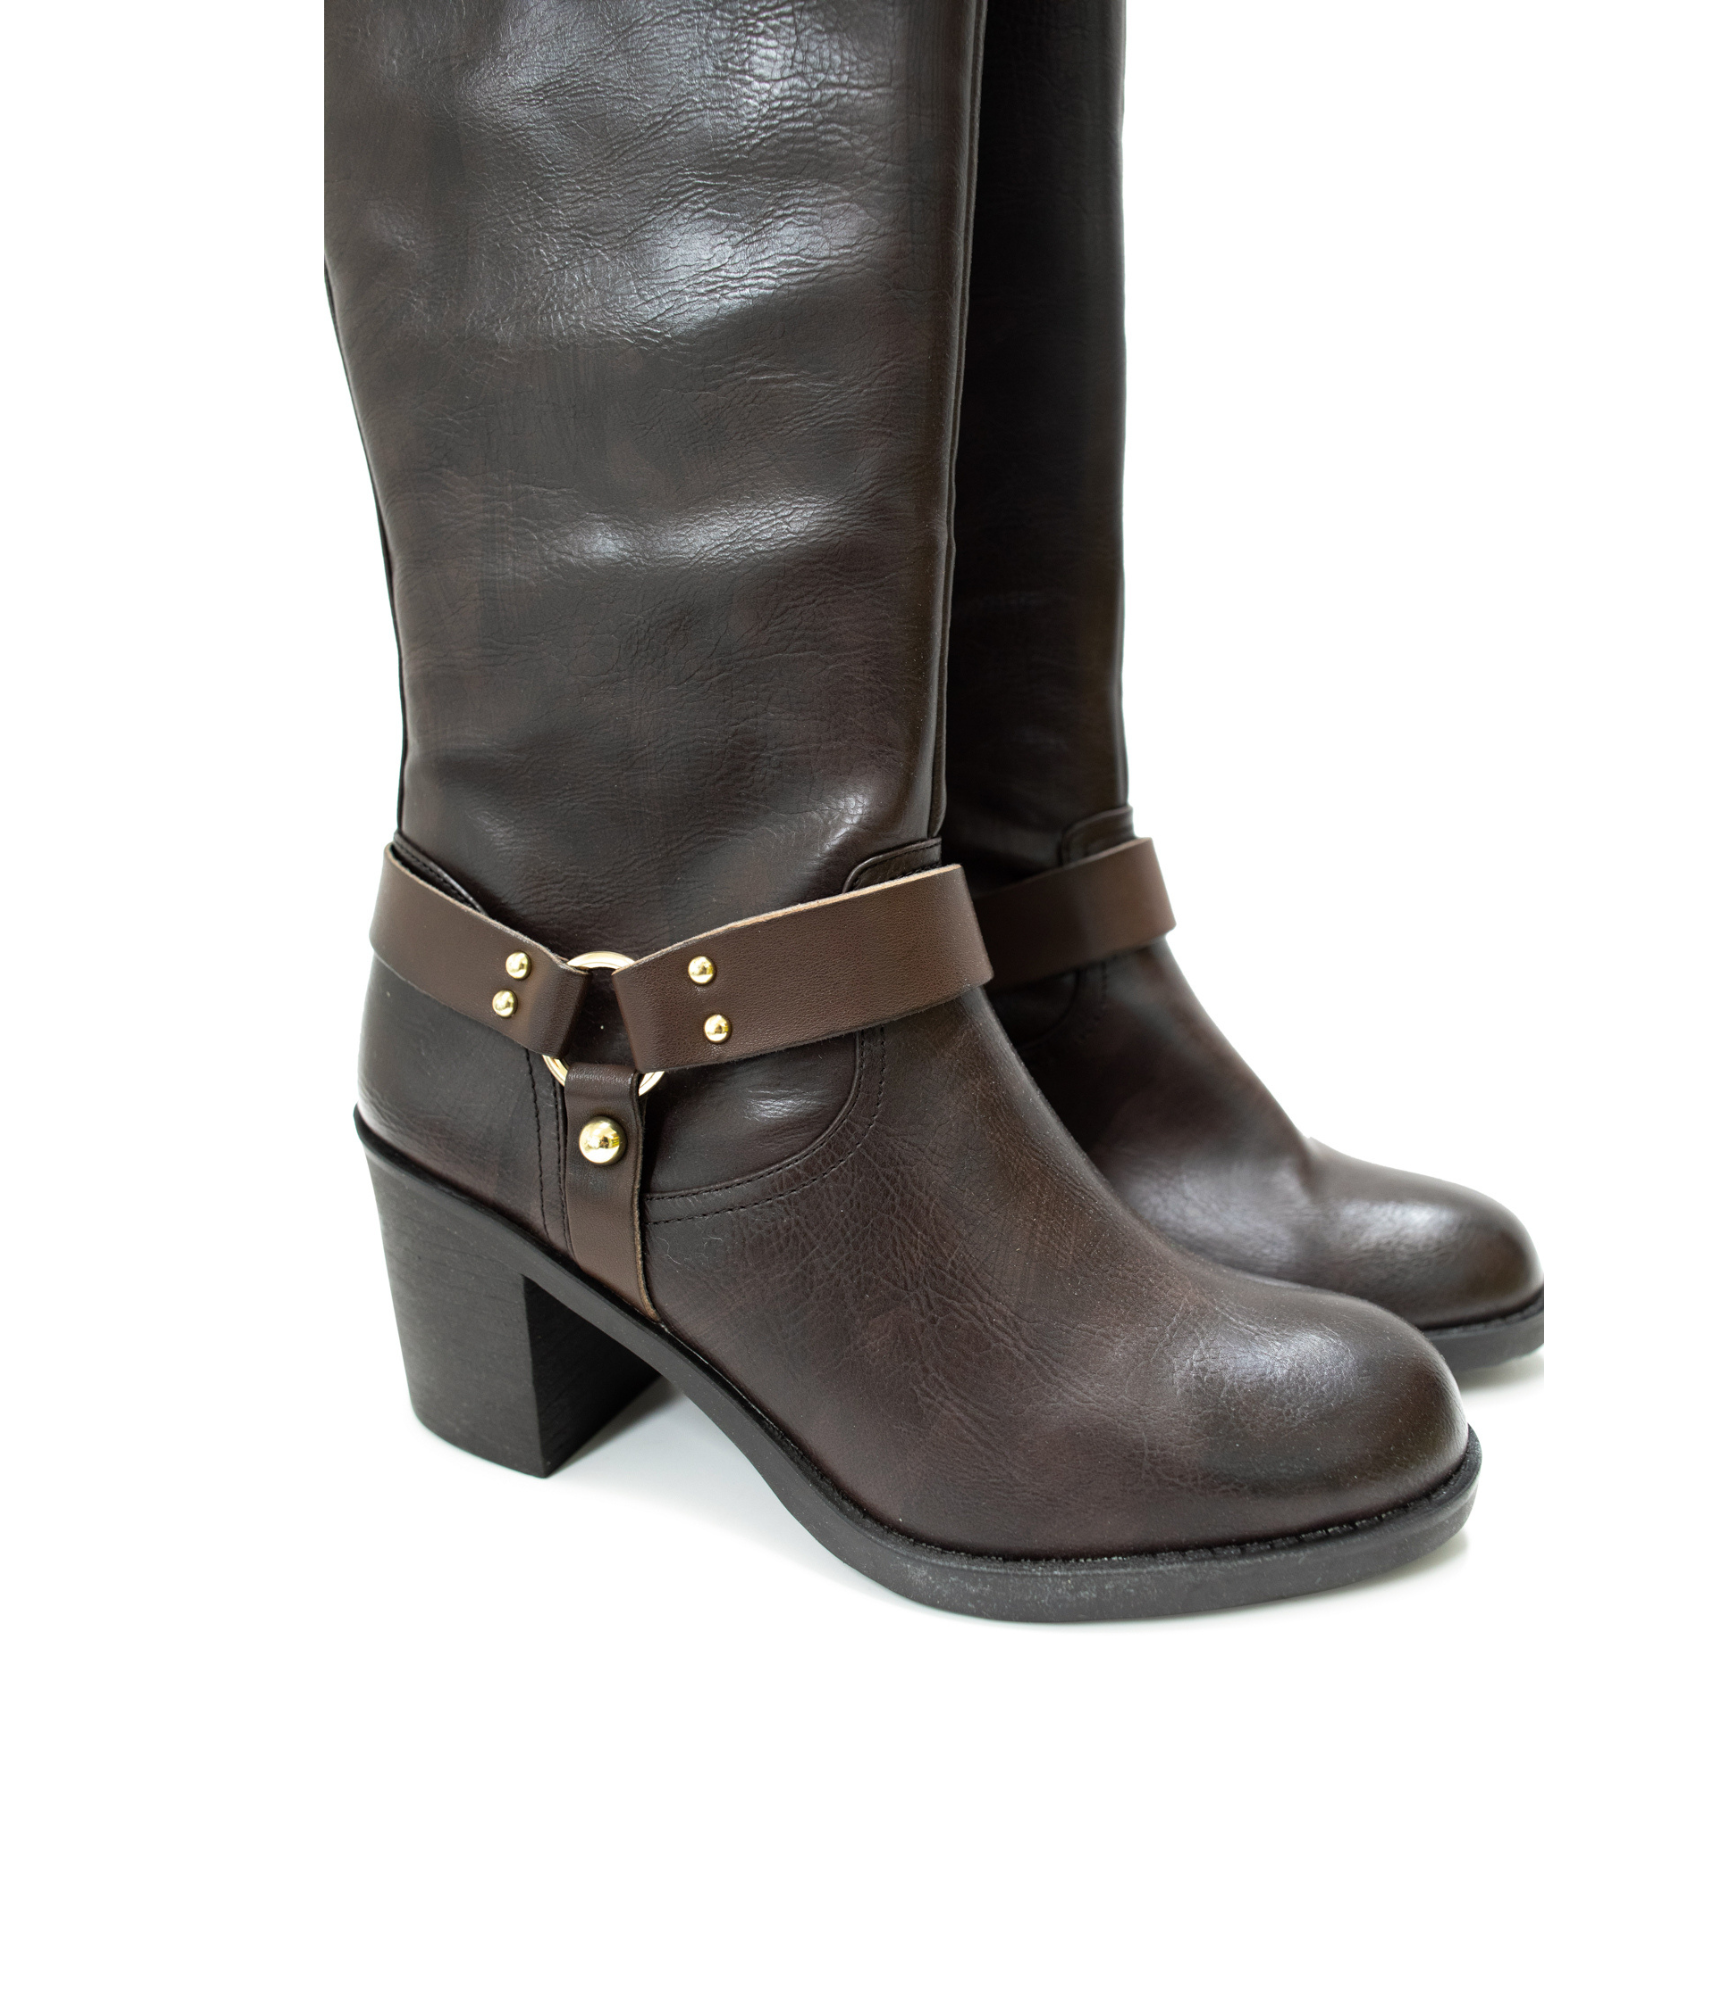 Barstow Knee High Boots